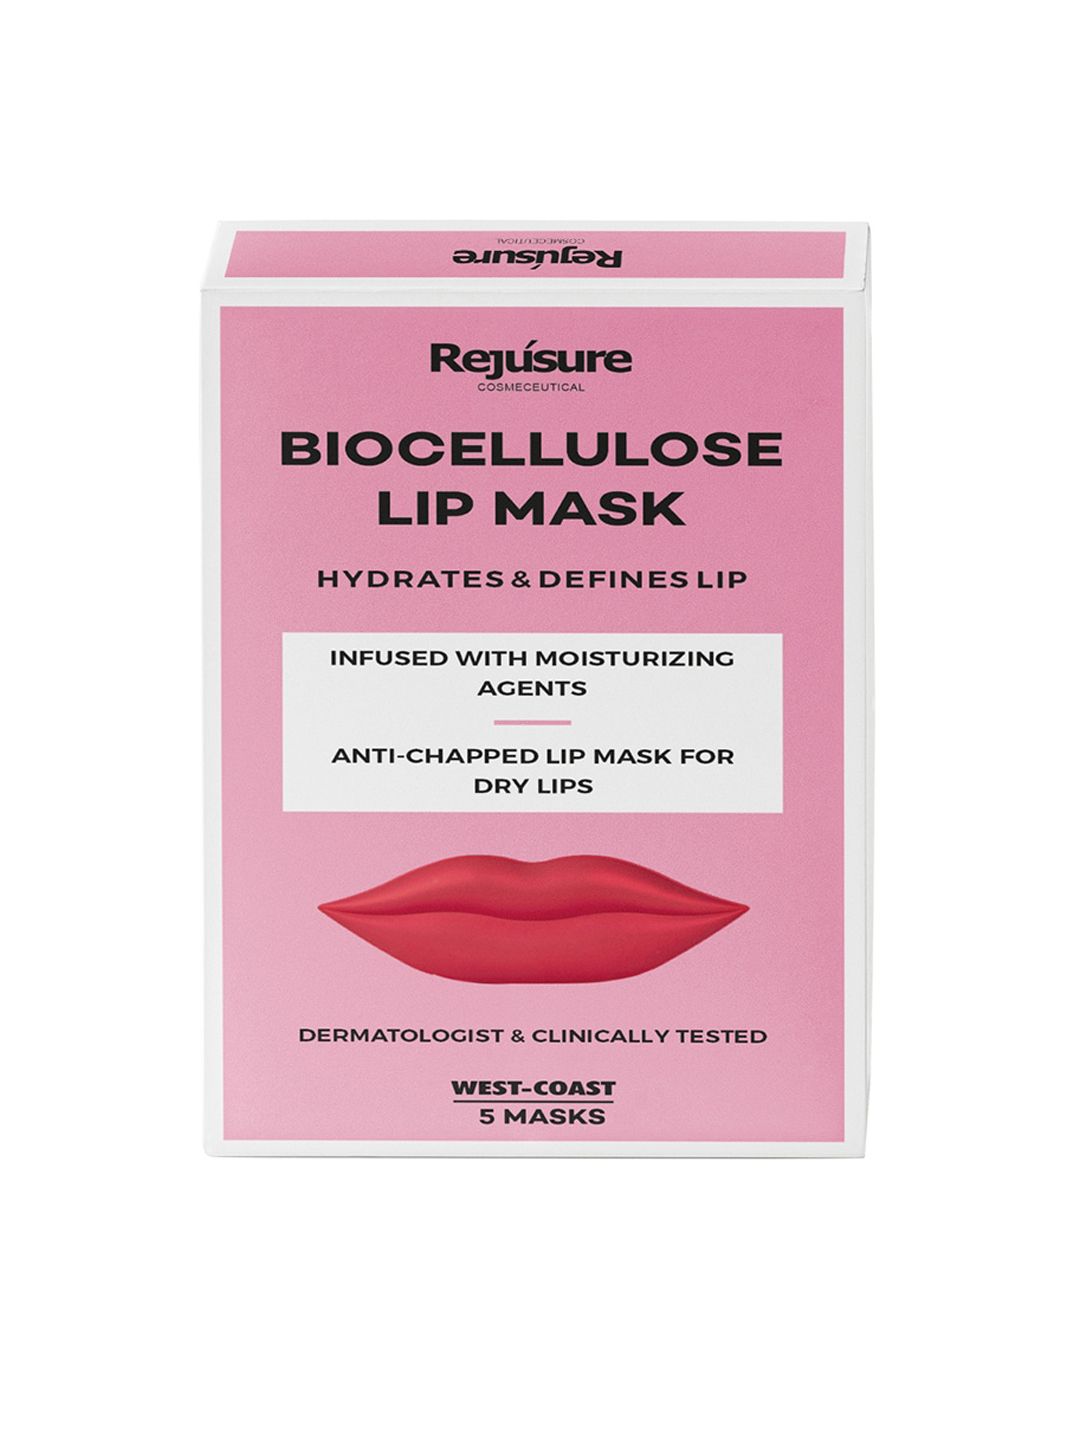 REJUSURE Biocellulose Anti-Chapped Lip Mask To Hydrate & Define Dry Lips - 5 Masks Price in India